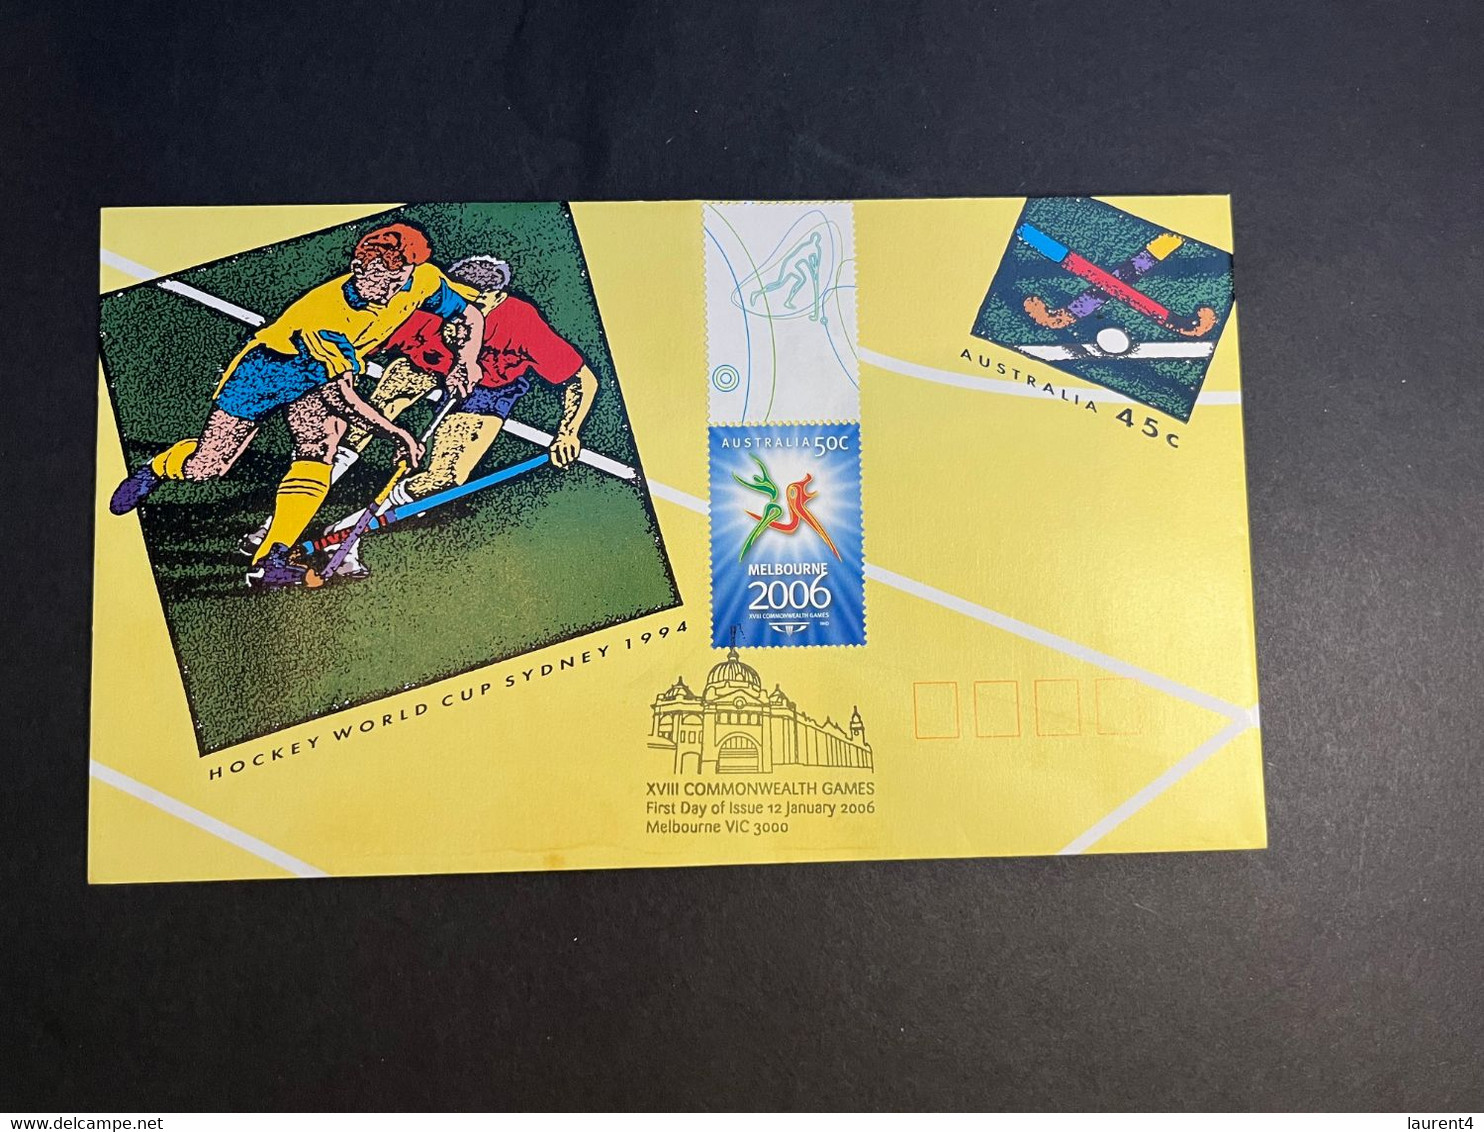 (3 N 35 A) Australia - Hockey World Cup 1994 (with Additional Stamp) Pre-Stamp Envelope - Hockey (sur Gazon)